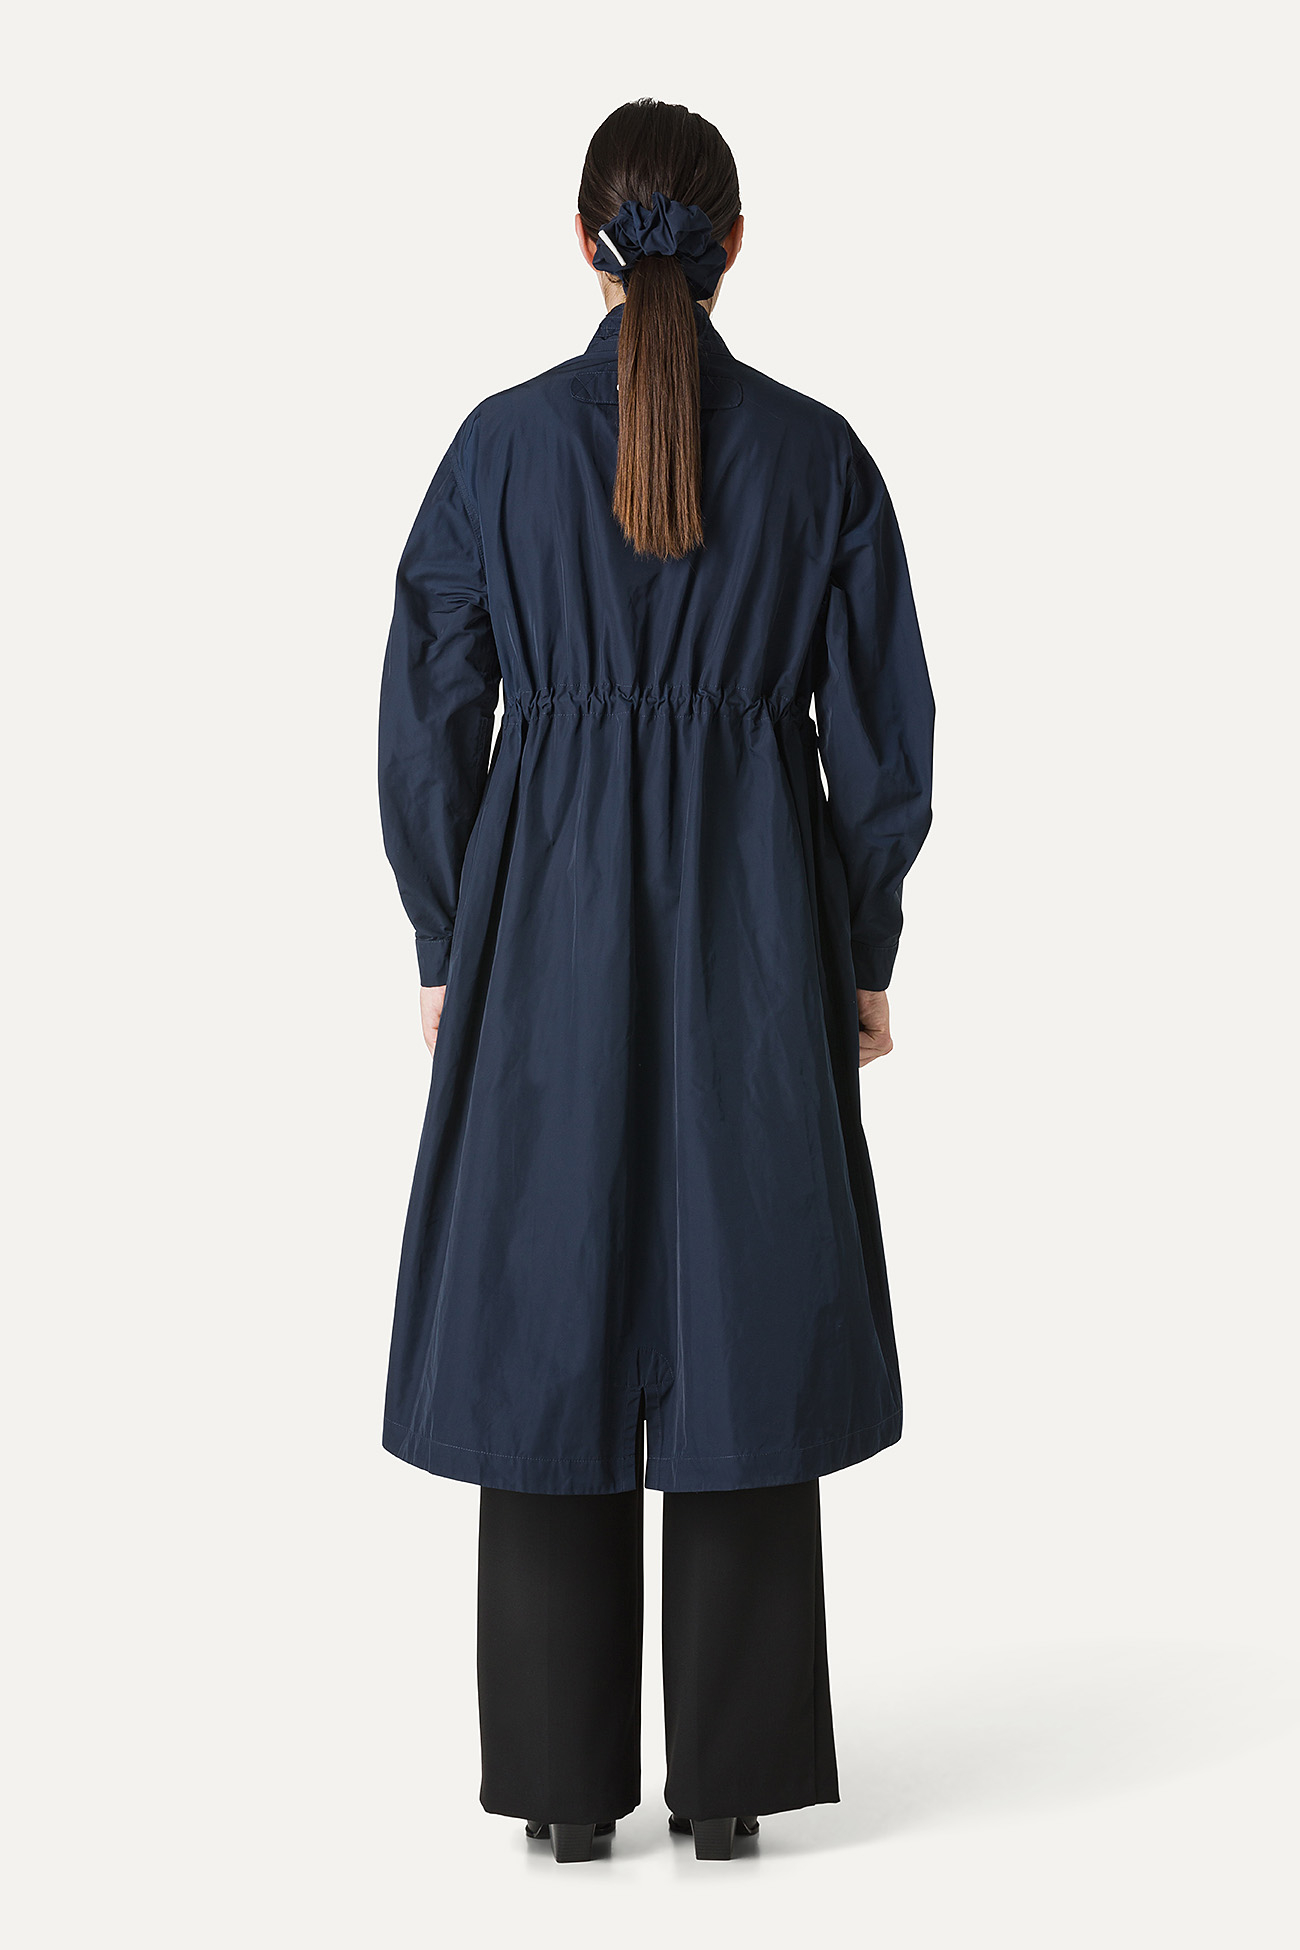 PARKA LUNGO OVER IN NYLON MEMORY 9211 - BLU NOTTE - OOF WEAR